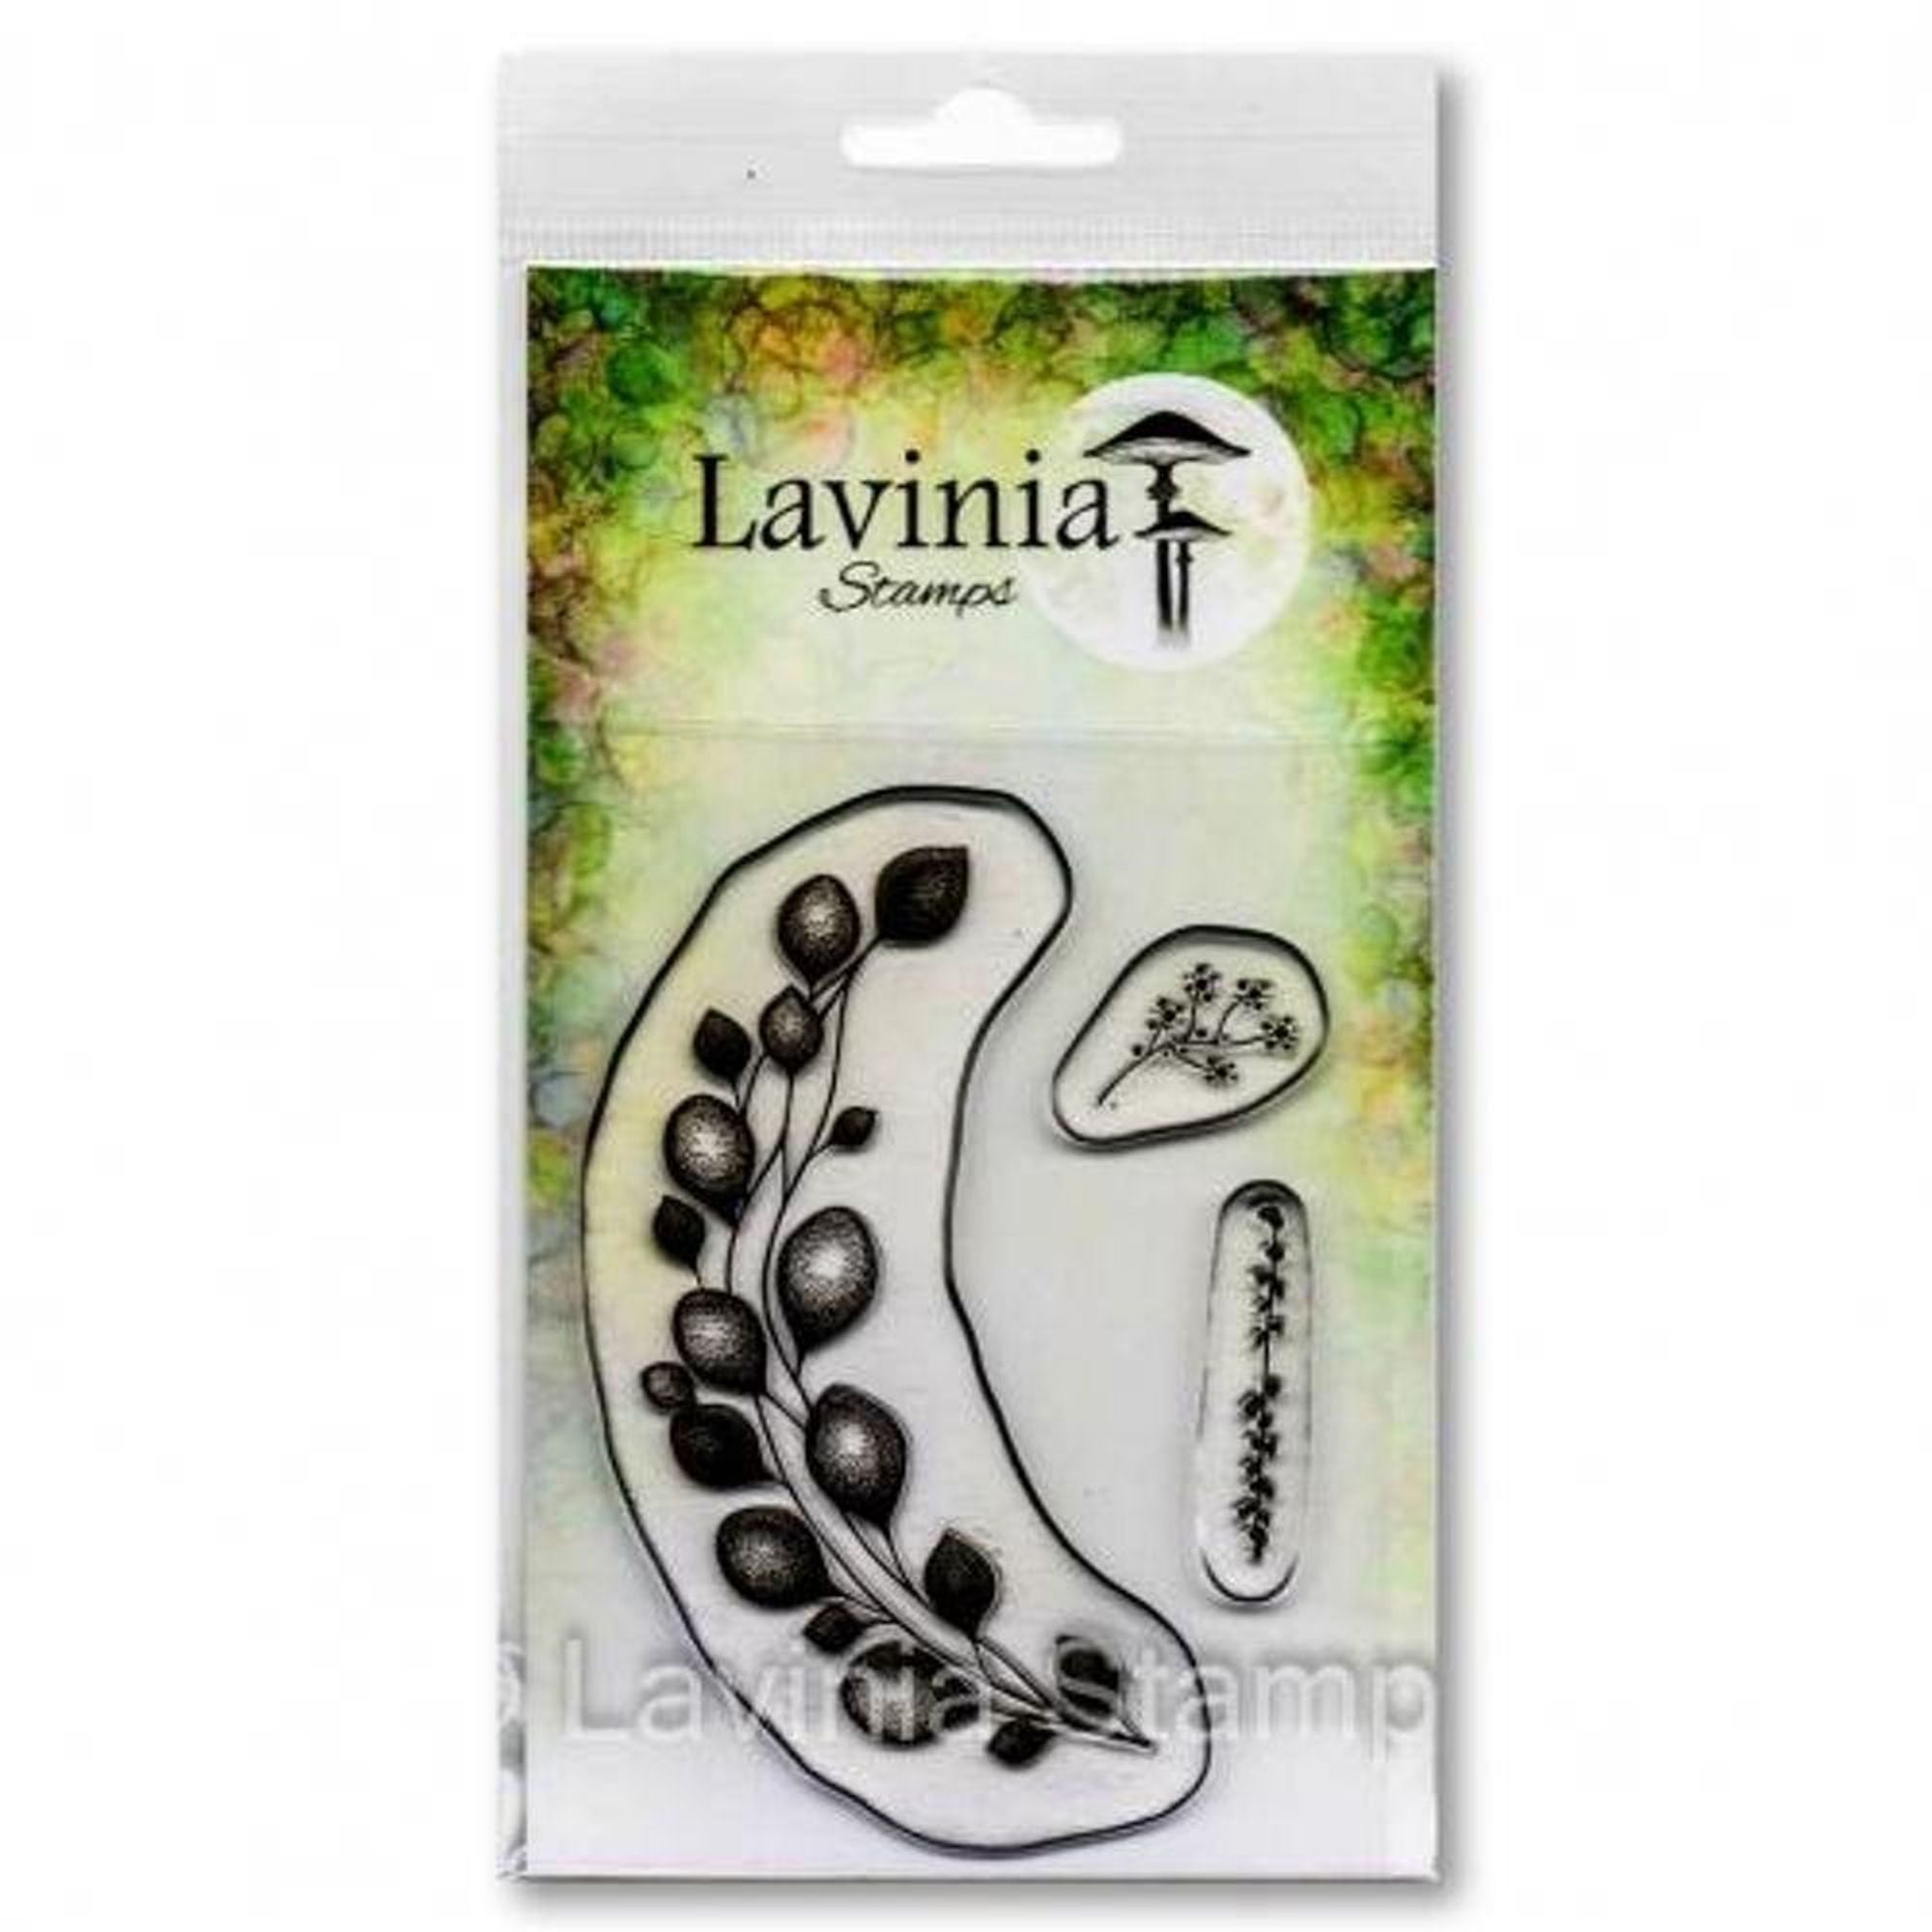 Lavinia Stamps Floral Wreath